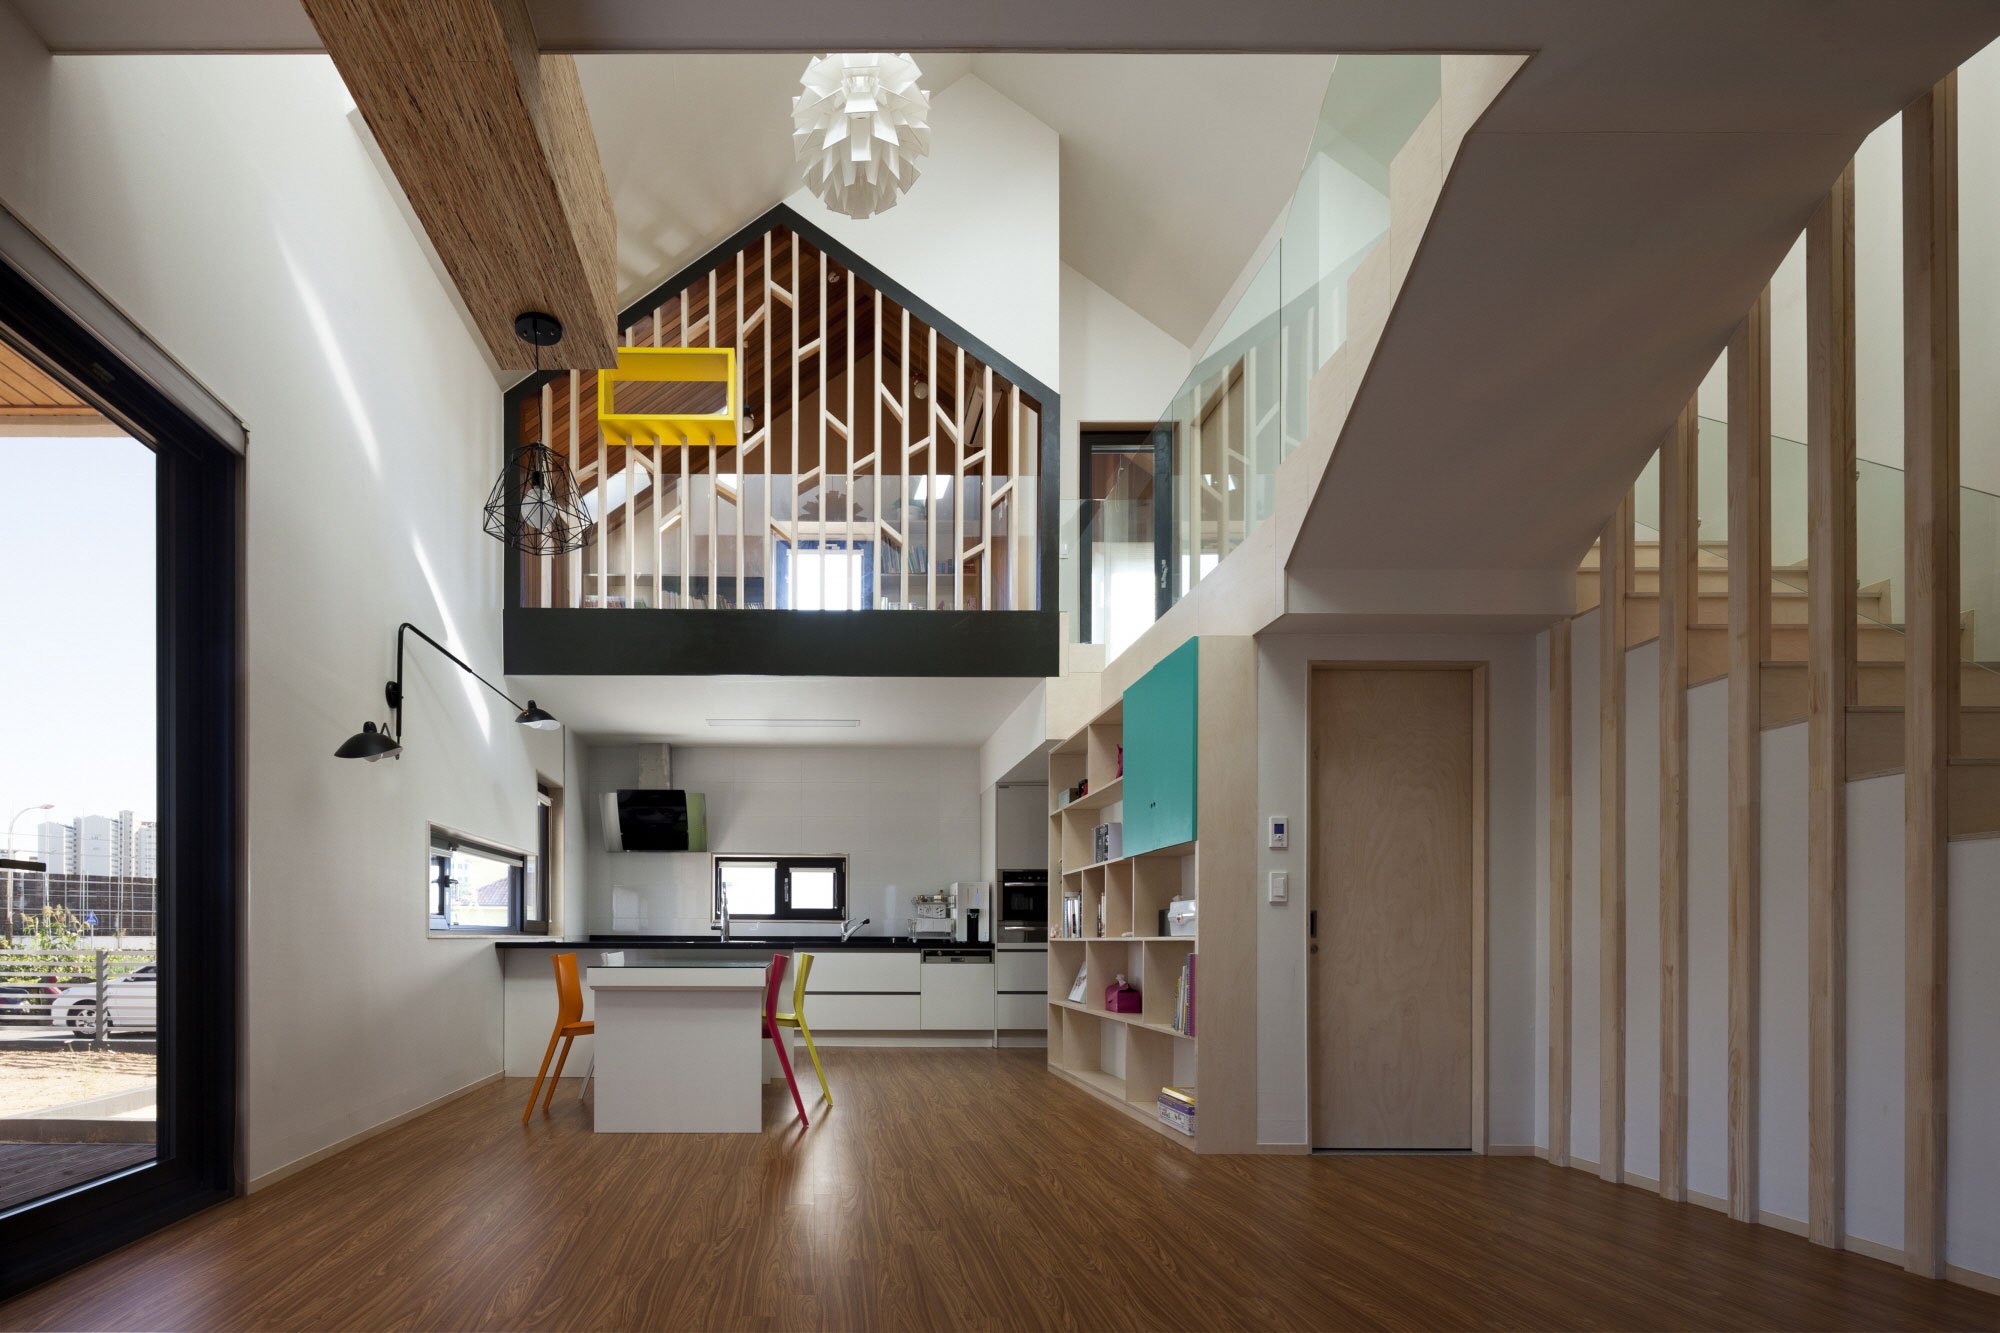 Iksan T Shaped House in South Korea by KDDH architects-11